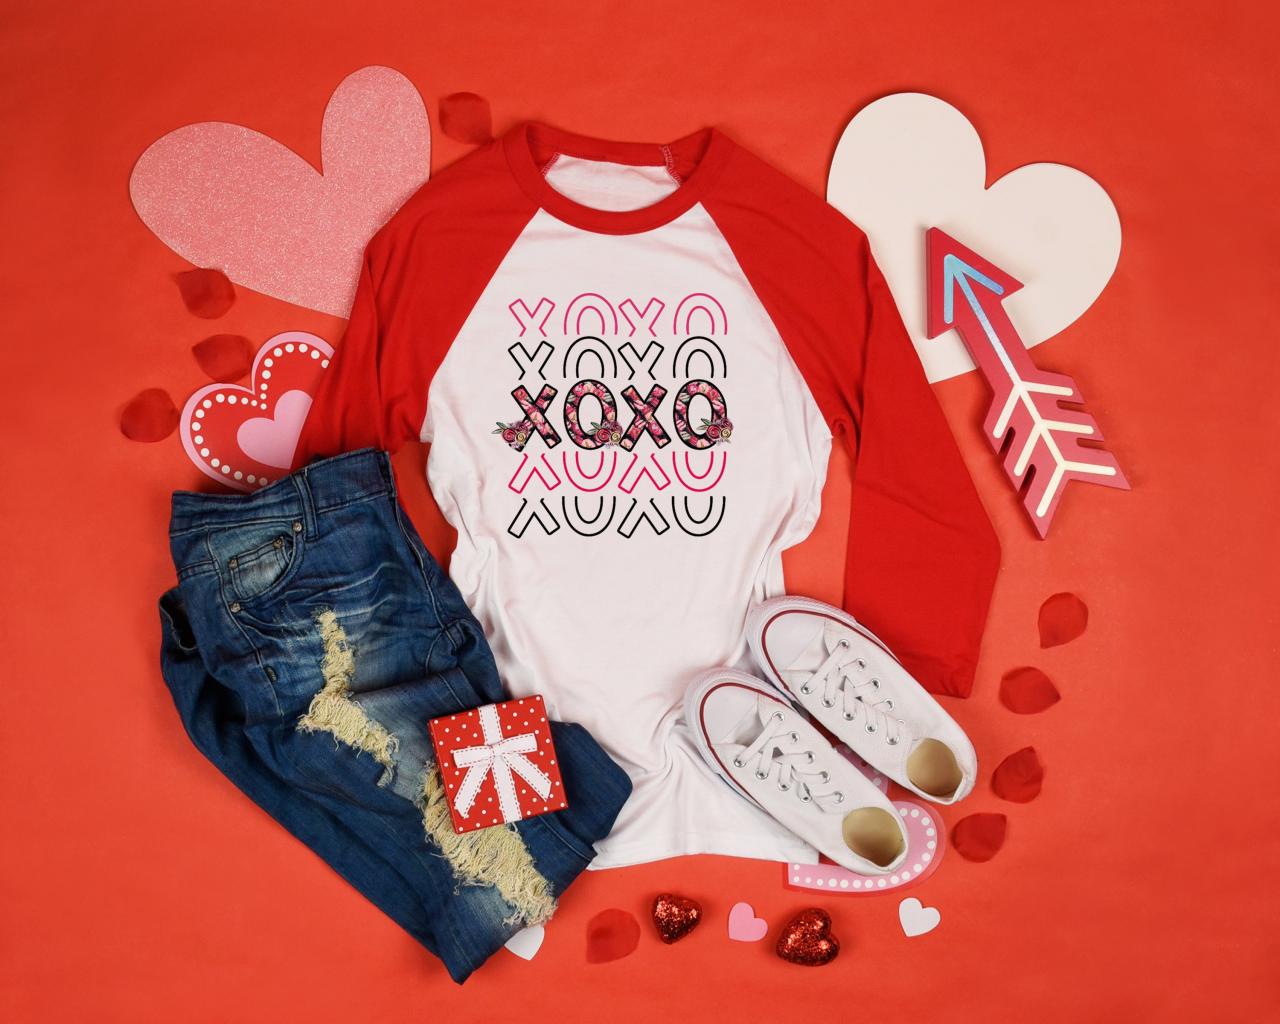 Xoxo Floral Hugs And Kisses. Valentines Day Raglan. Sublimation. Next Level. Valentines Day Tee. Roses